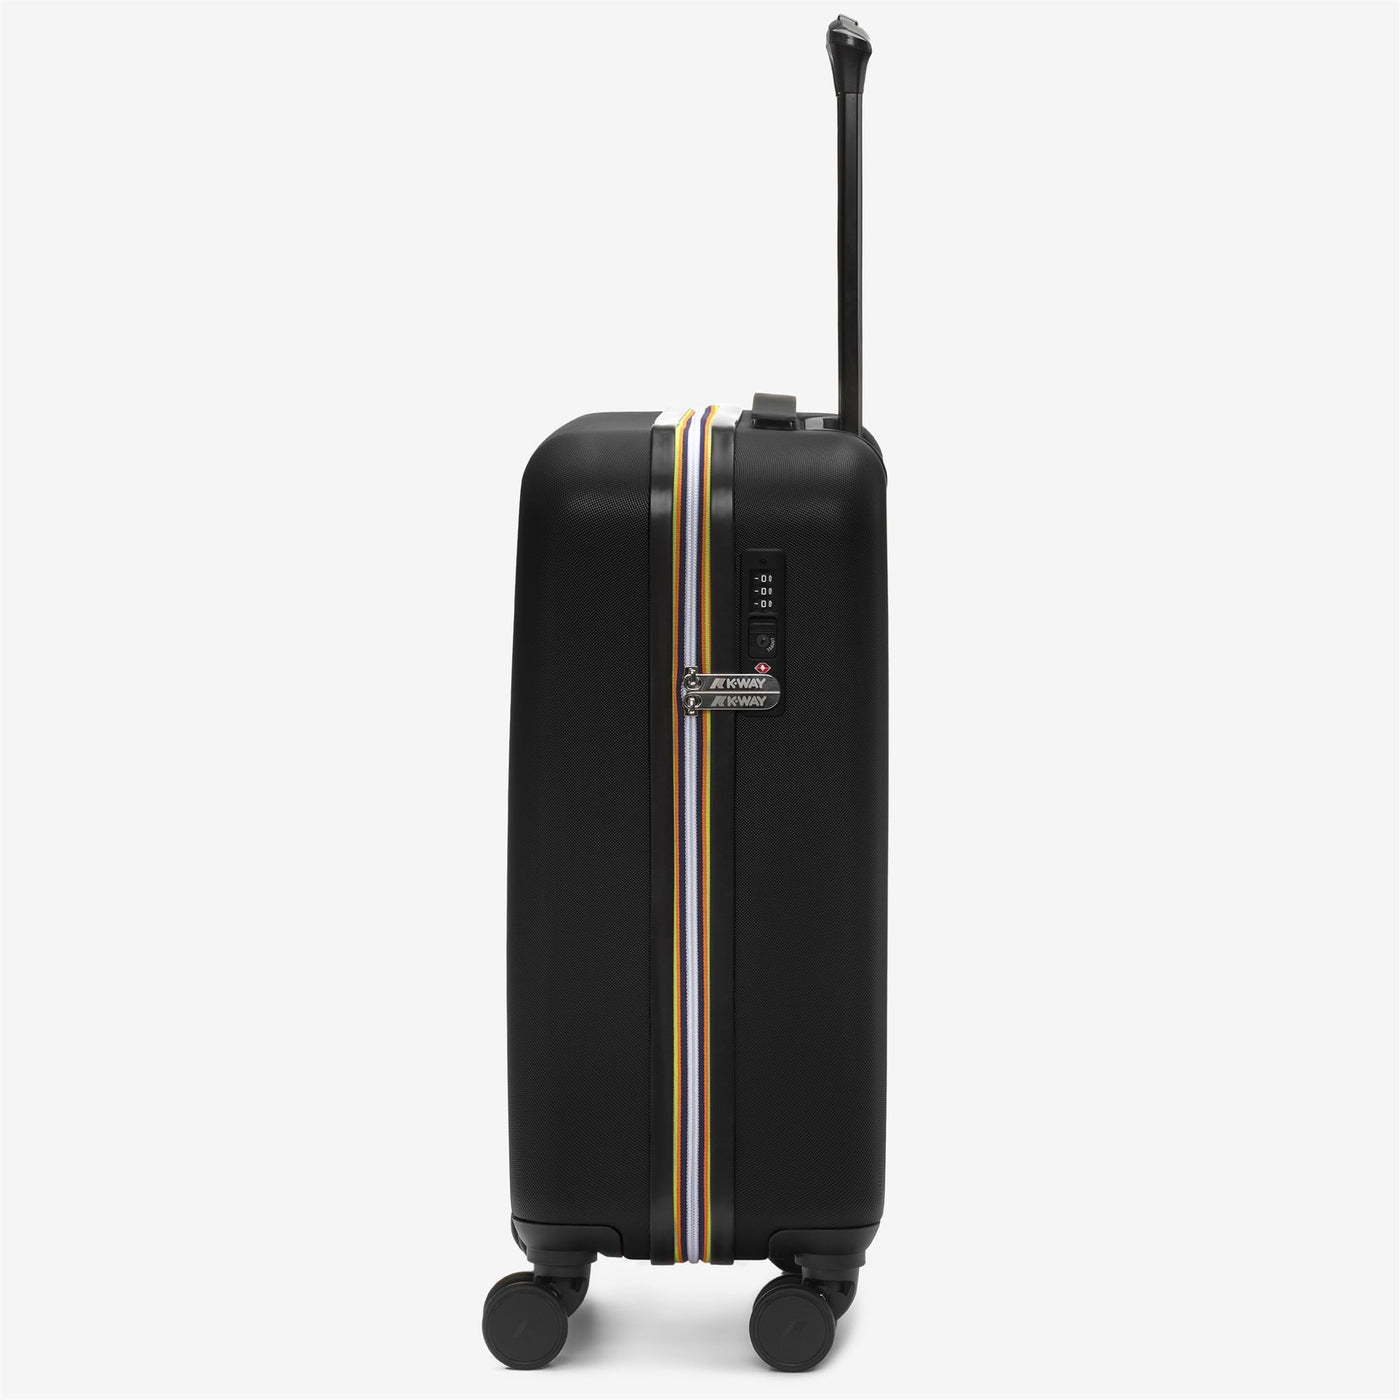 Luggage Bags Unisex TROLLEY SMALL Trolley BLACK PURE - BLUE MD COBALT Dressed Front (jpg Rgb)	